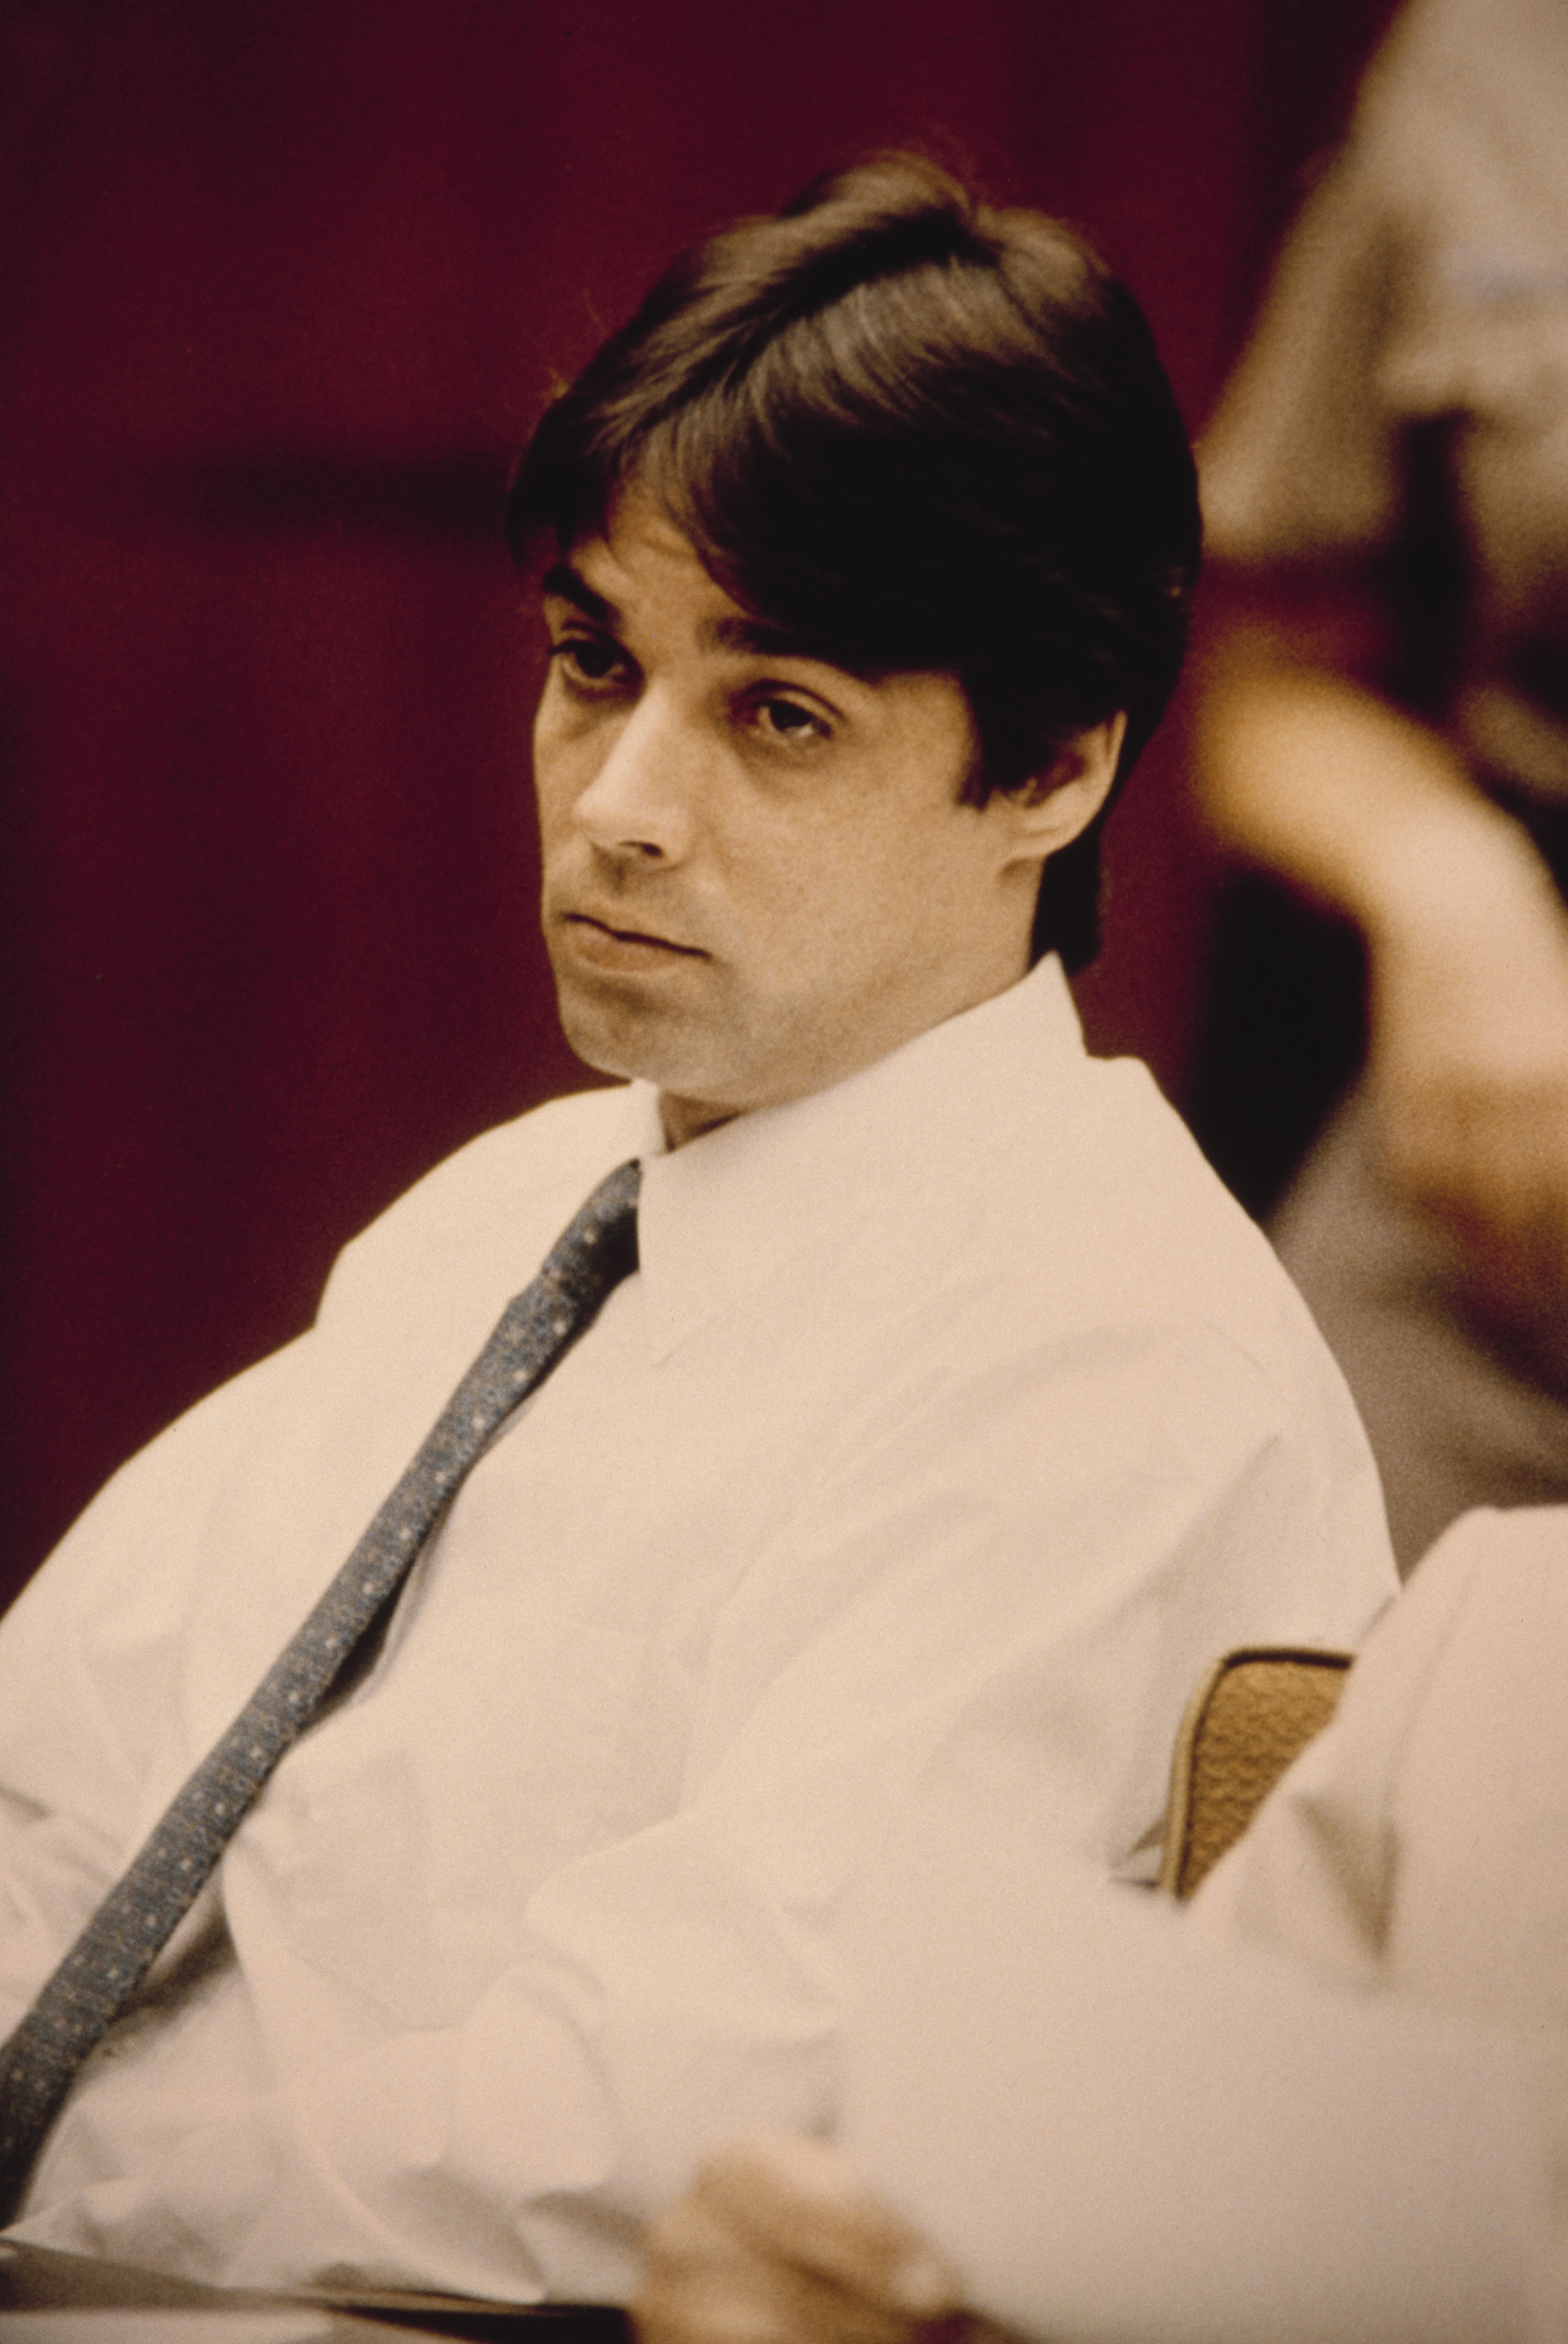 Christian Brando during his pre-trial in Santa Monica, California on August 14, 1990 | Source: Getty Images